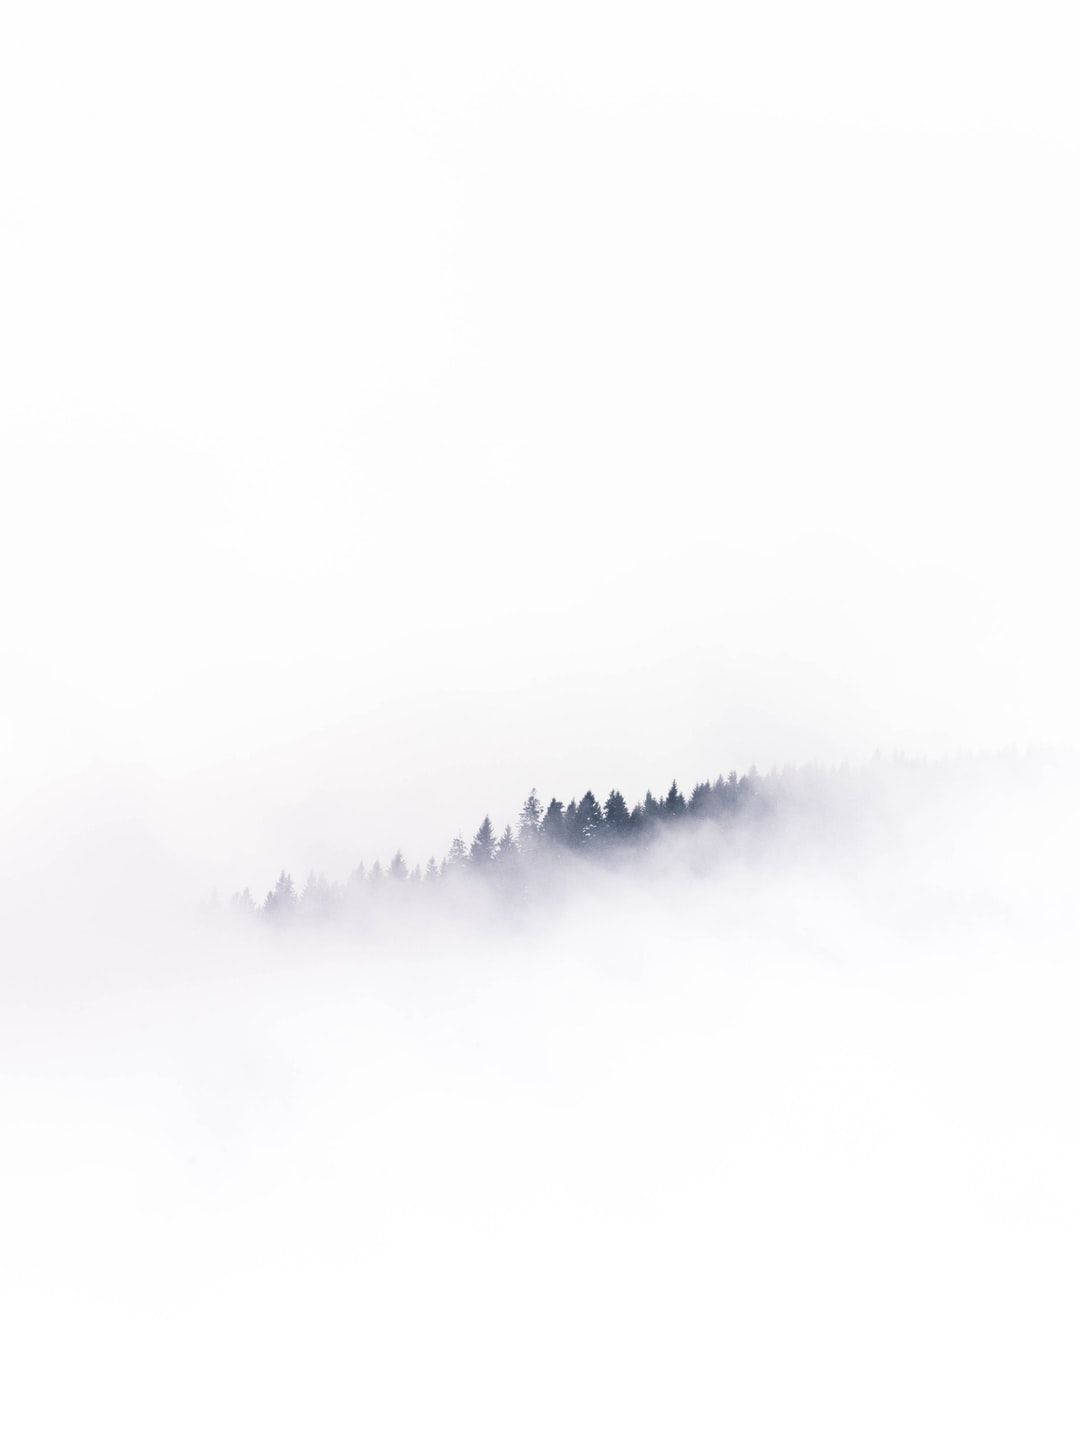 Forest Rising From Solid White Smoke Wallpaper